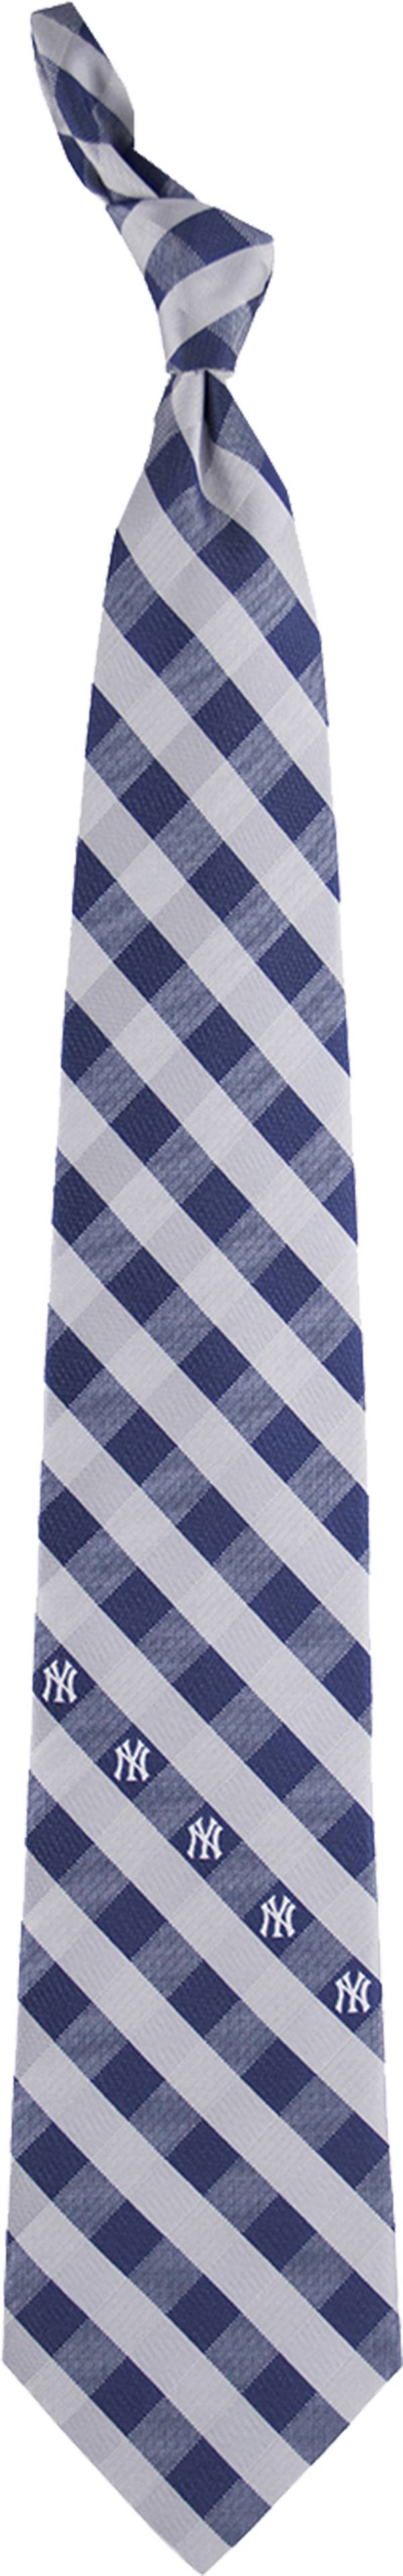 Eagles Wings New York Yankees Checkered Necktie product image